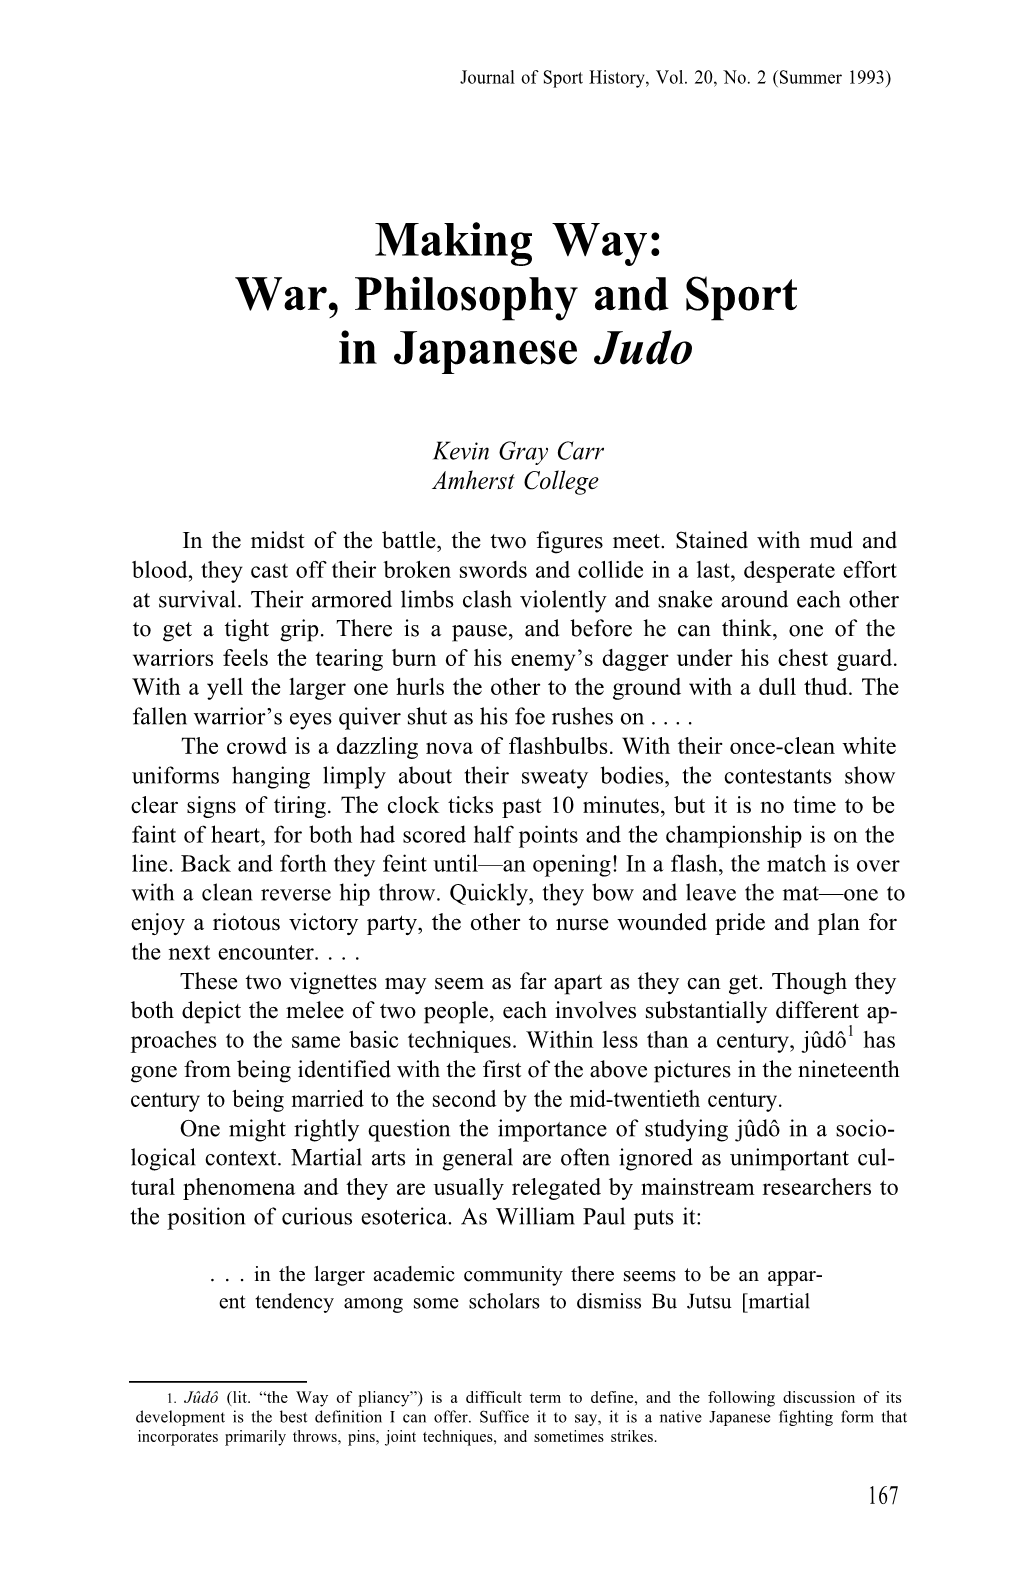 Making Way: War, Philosophy and Sport in Japanese Judo